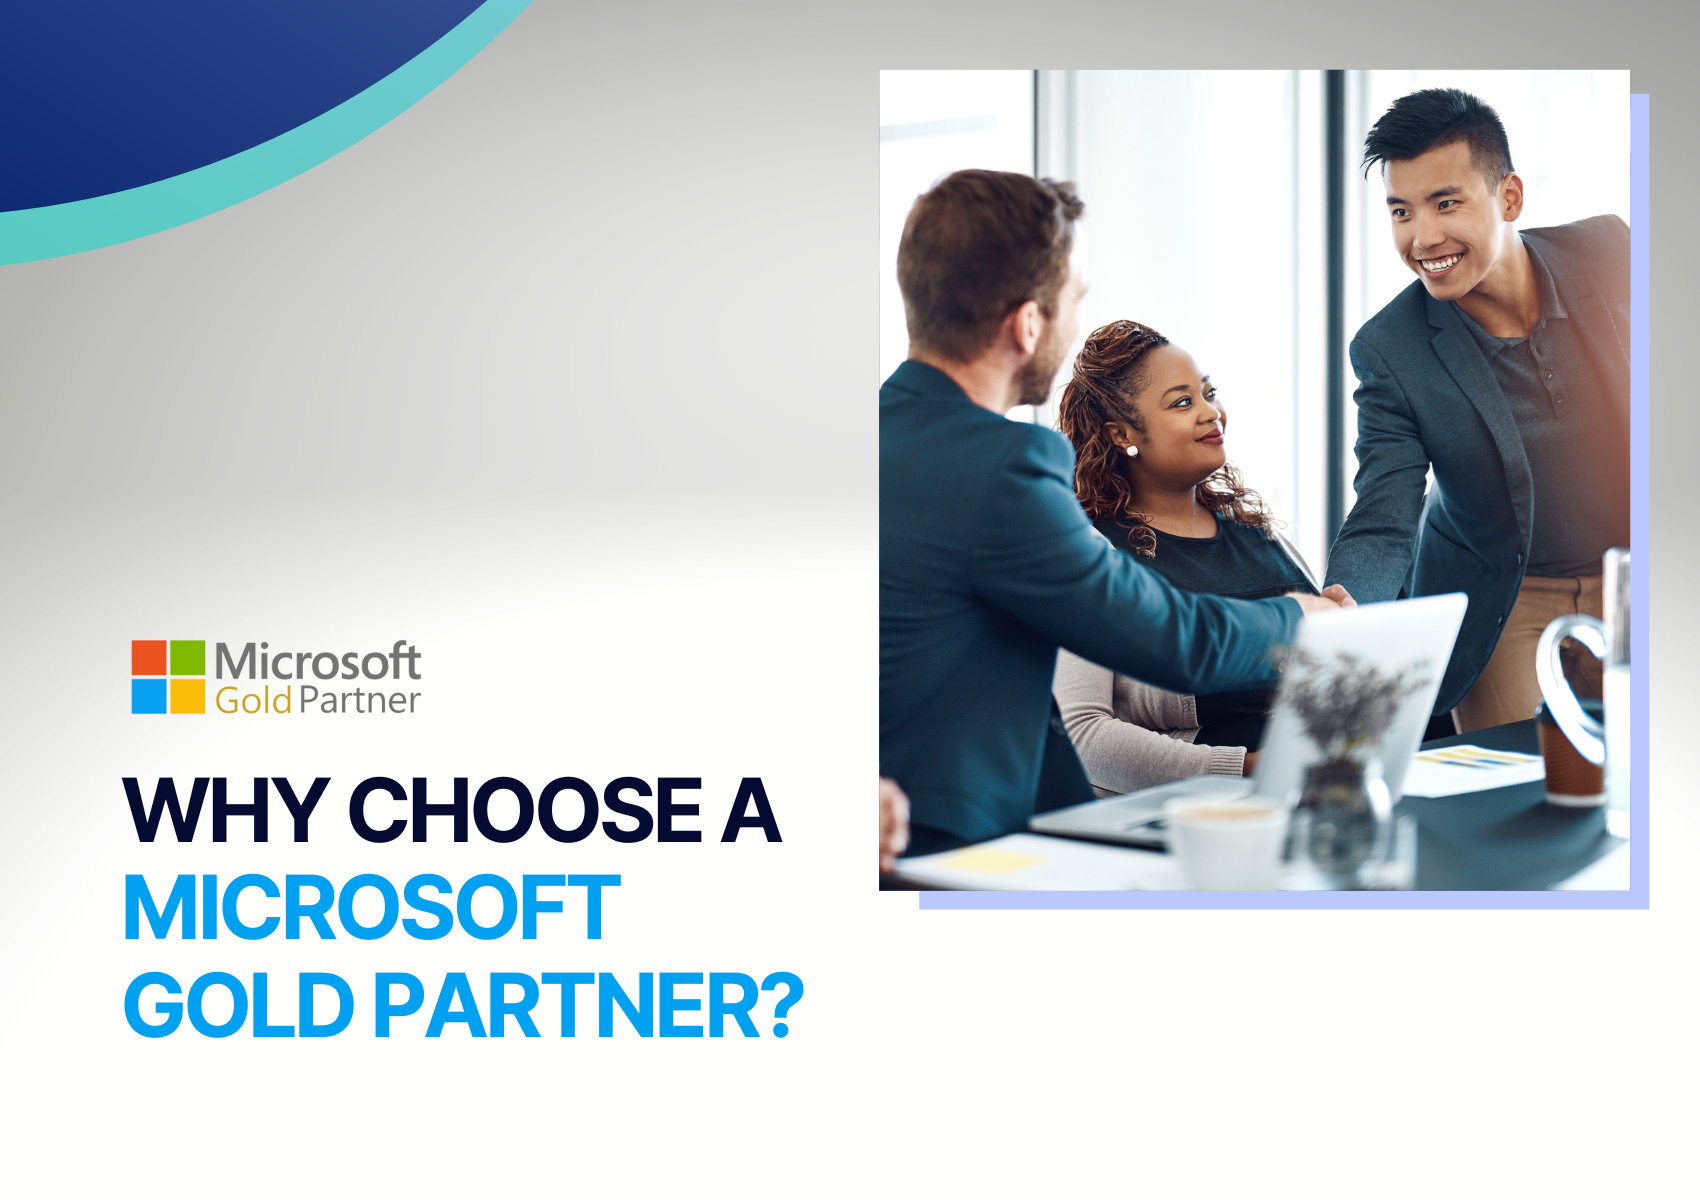 Why Choose a Microsoft Gold Partner